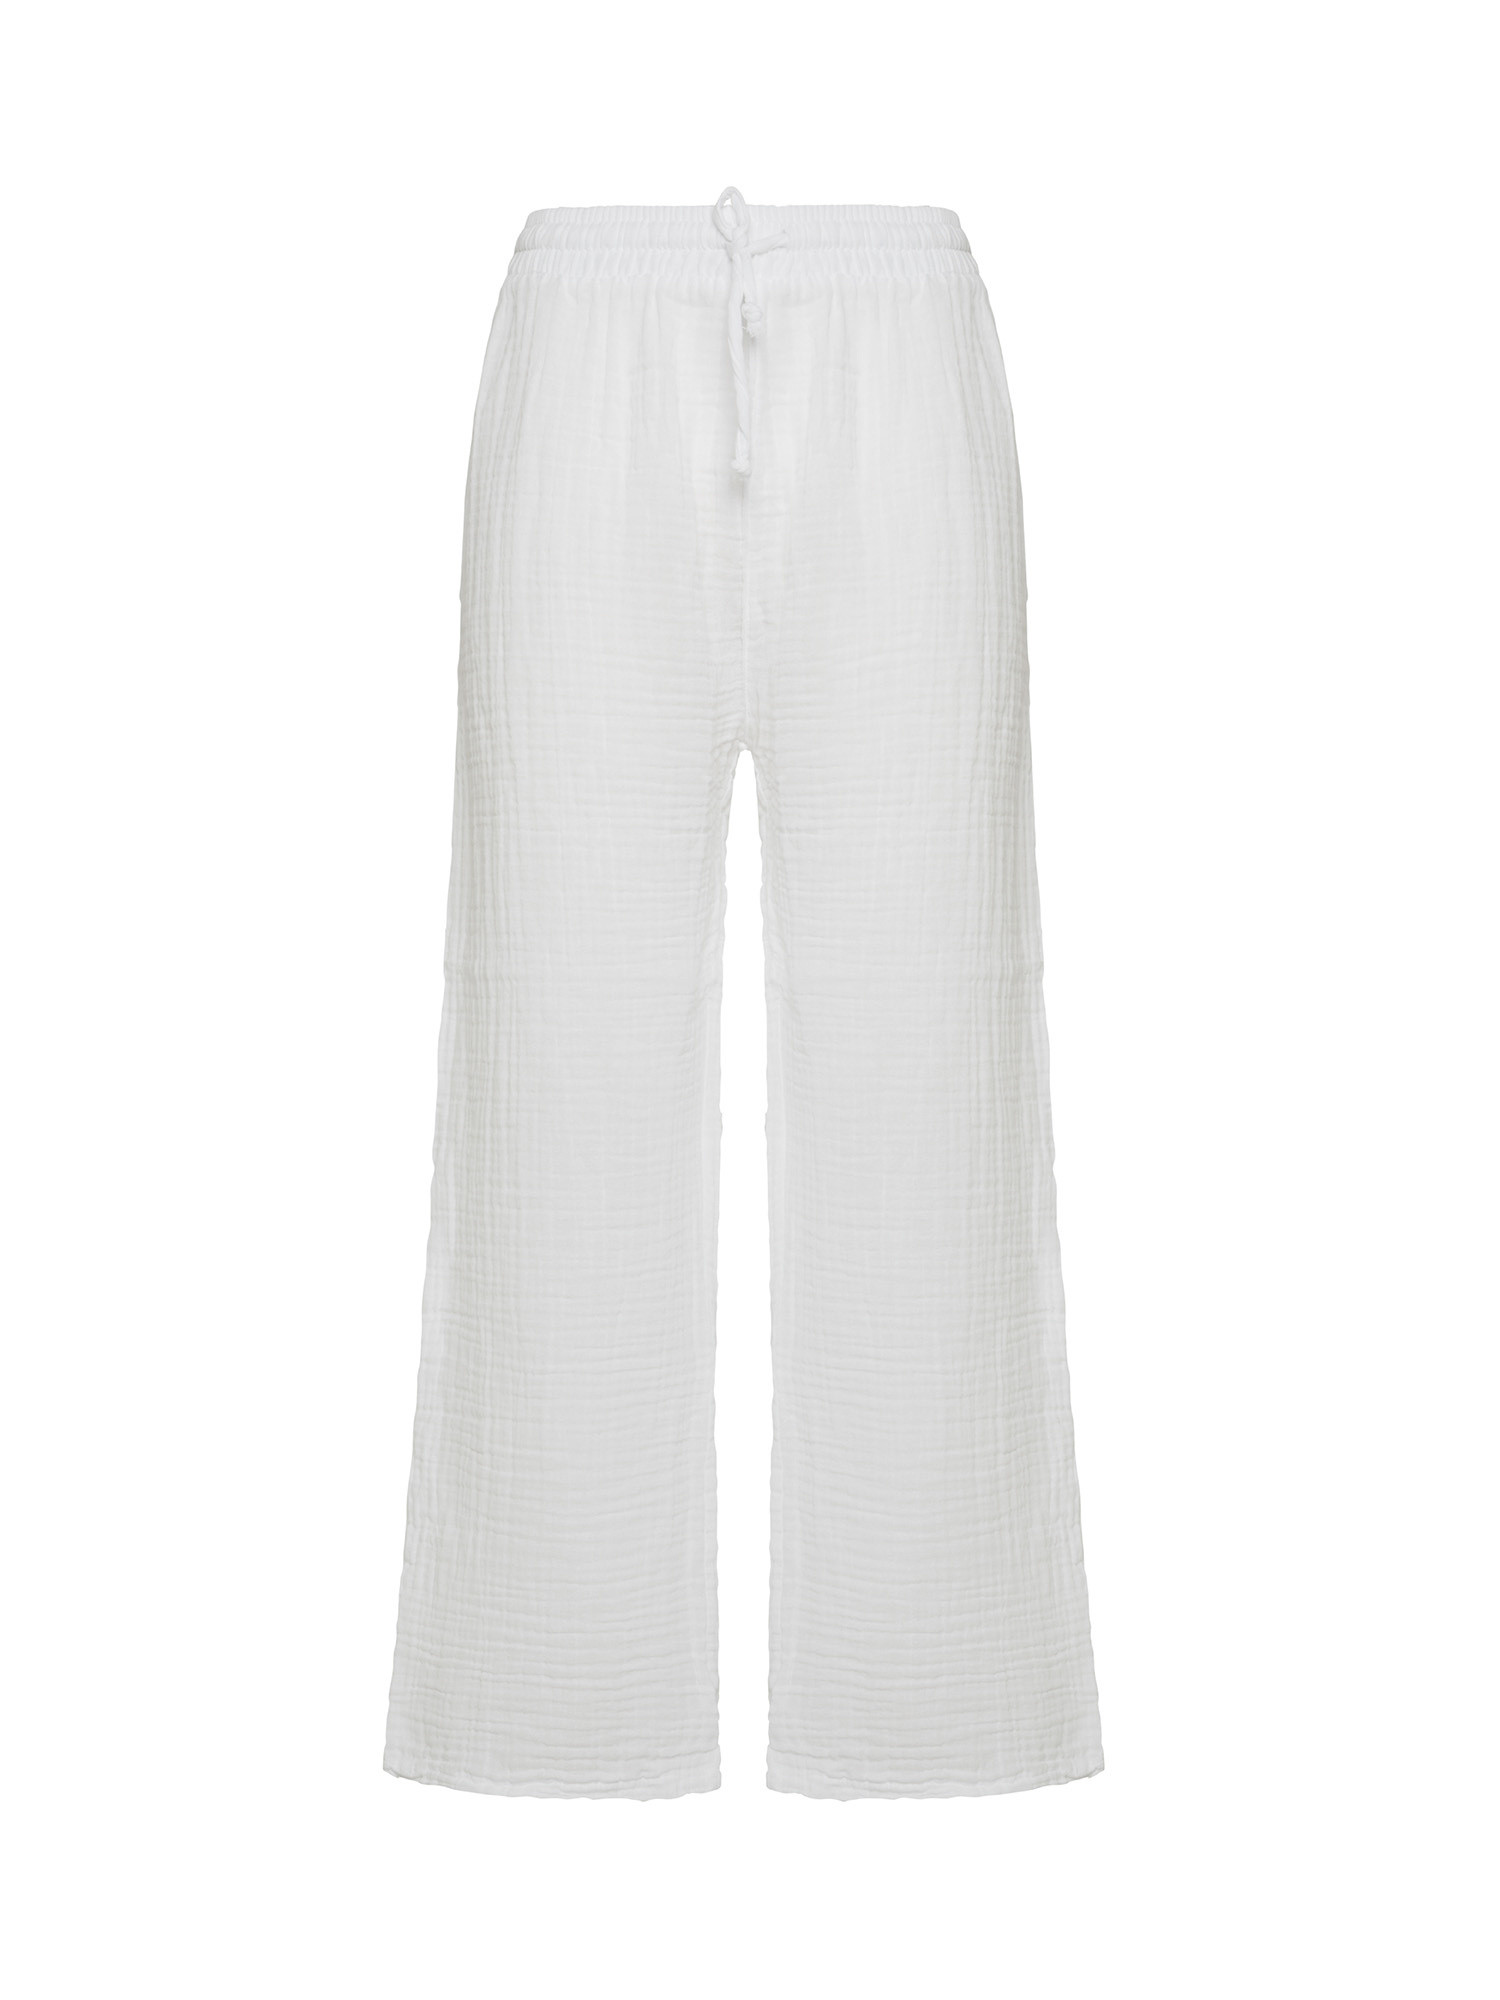 Long muslin trousers with palazzo cut, White, large image number 0